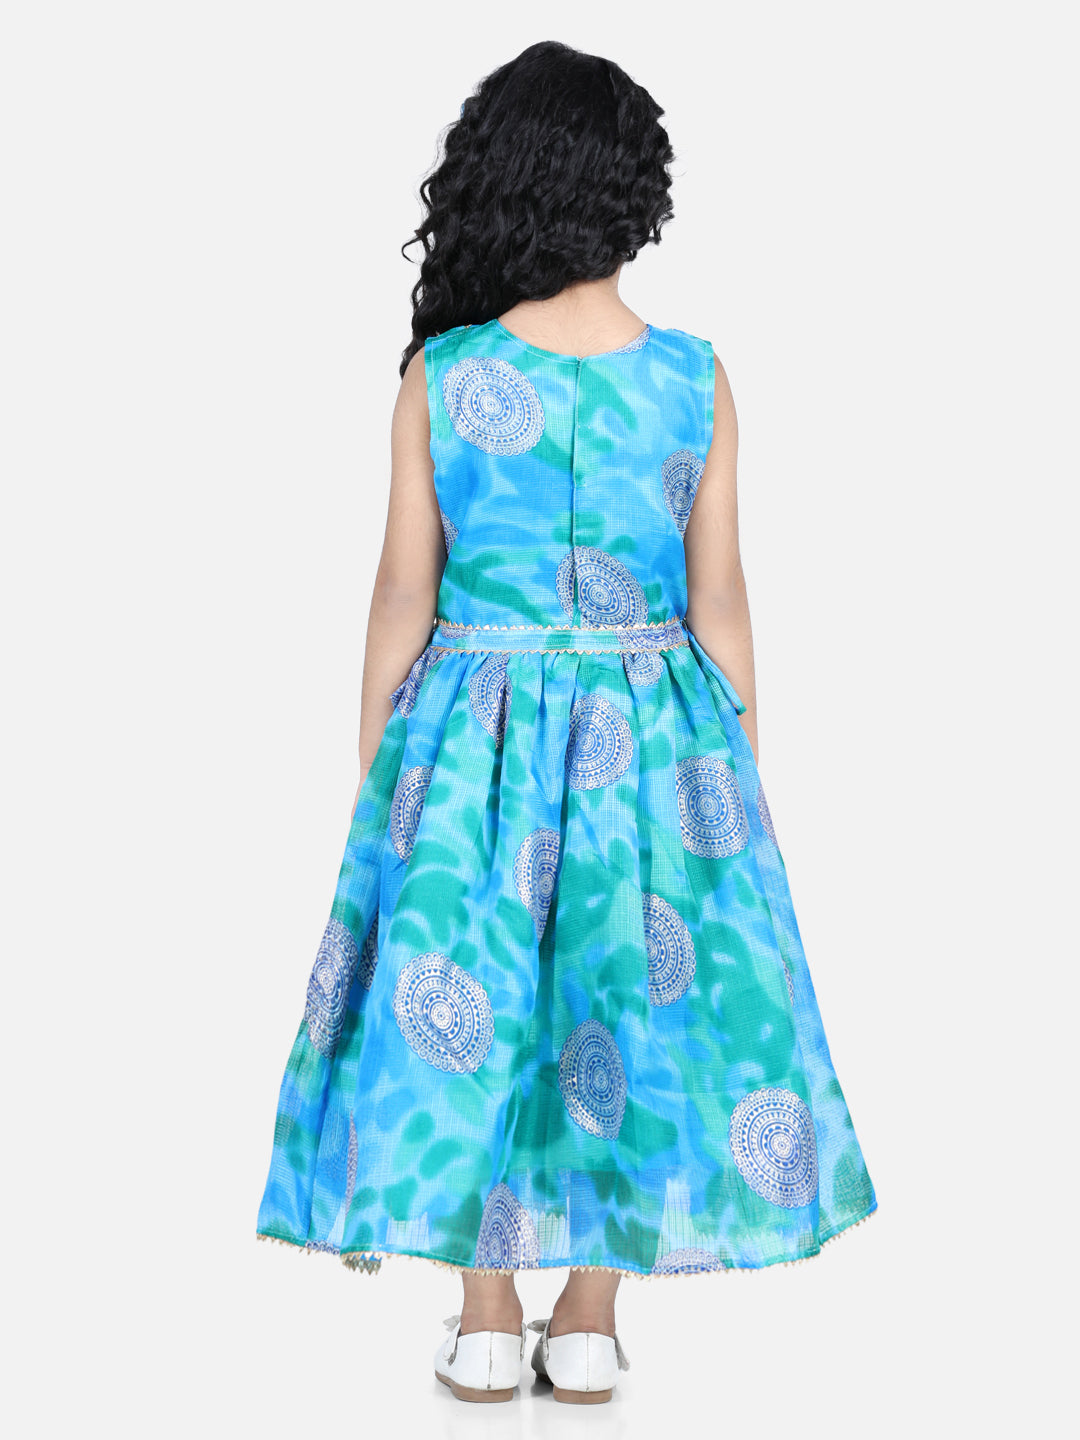 Blue Foil Printed and Embroidered Dress